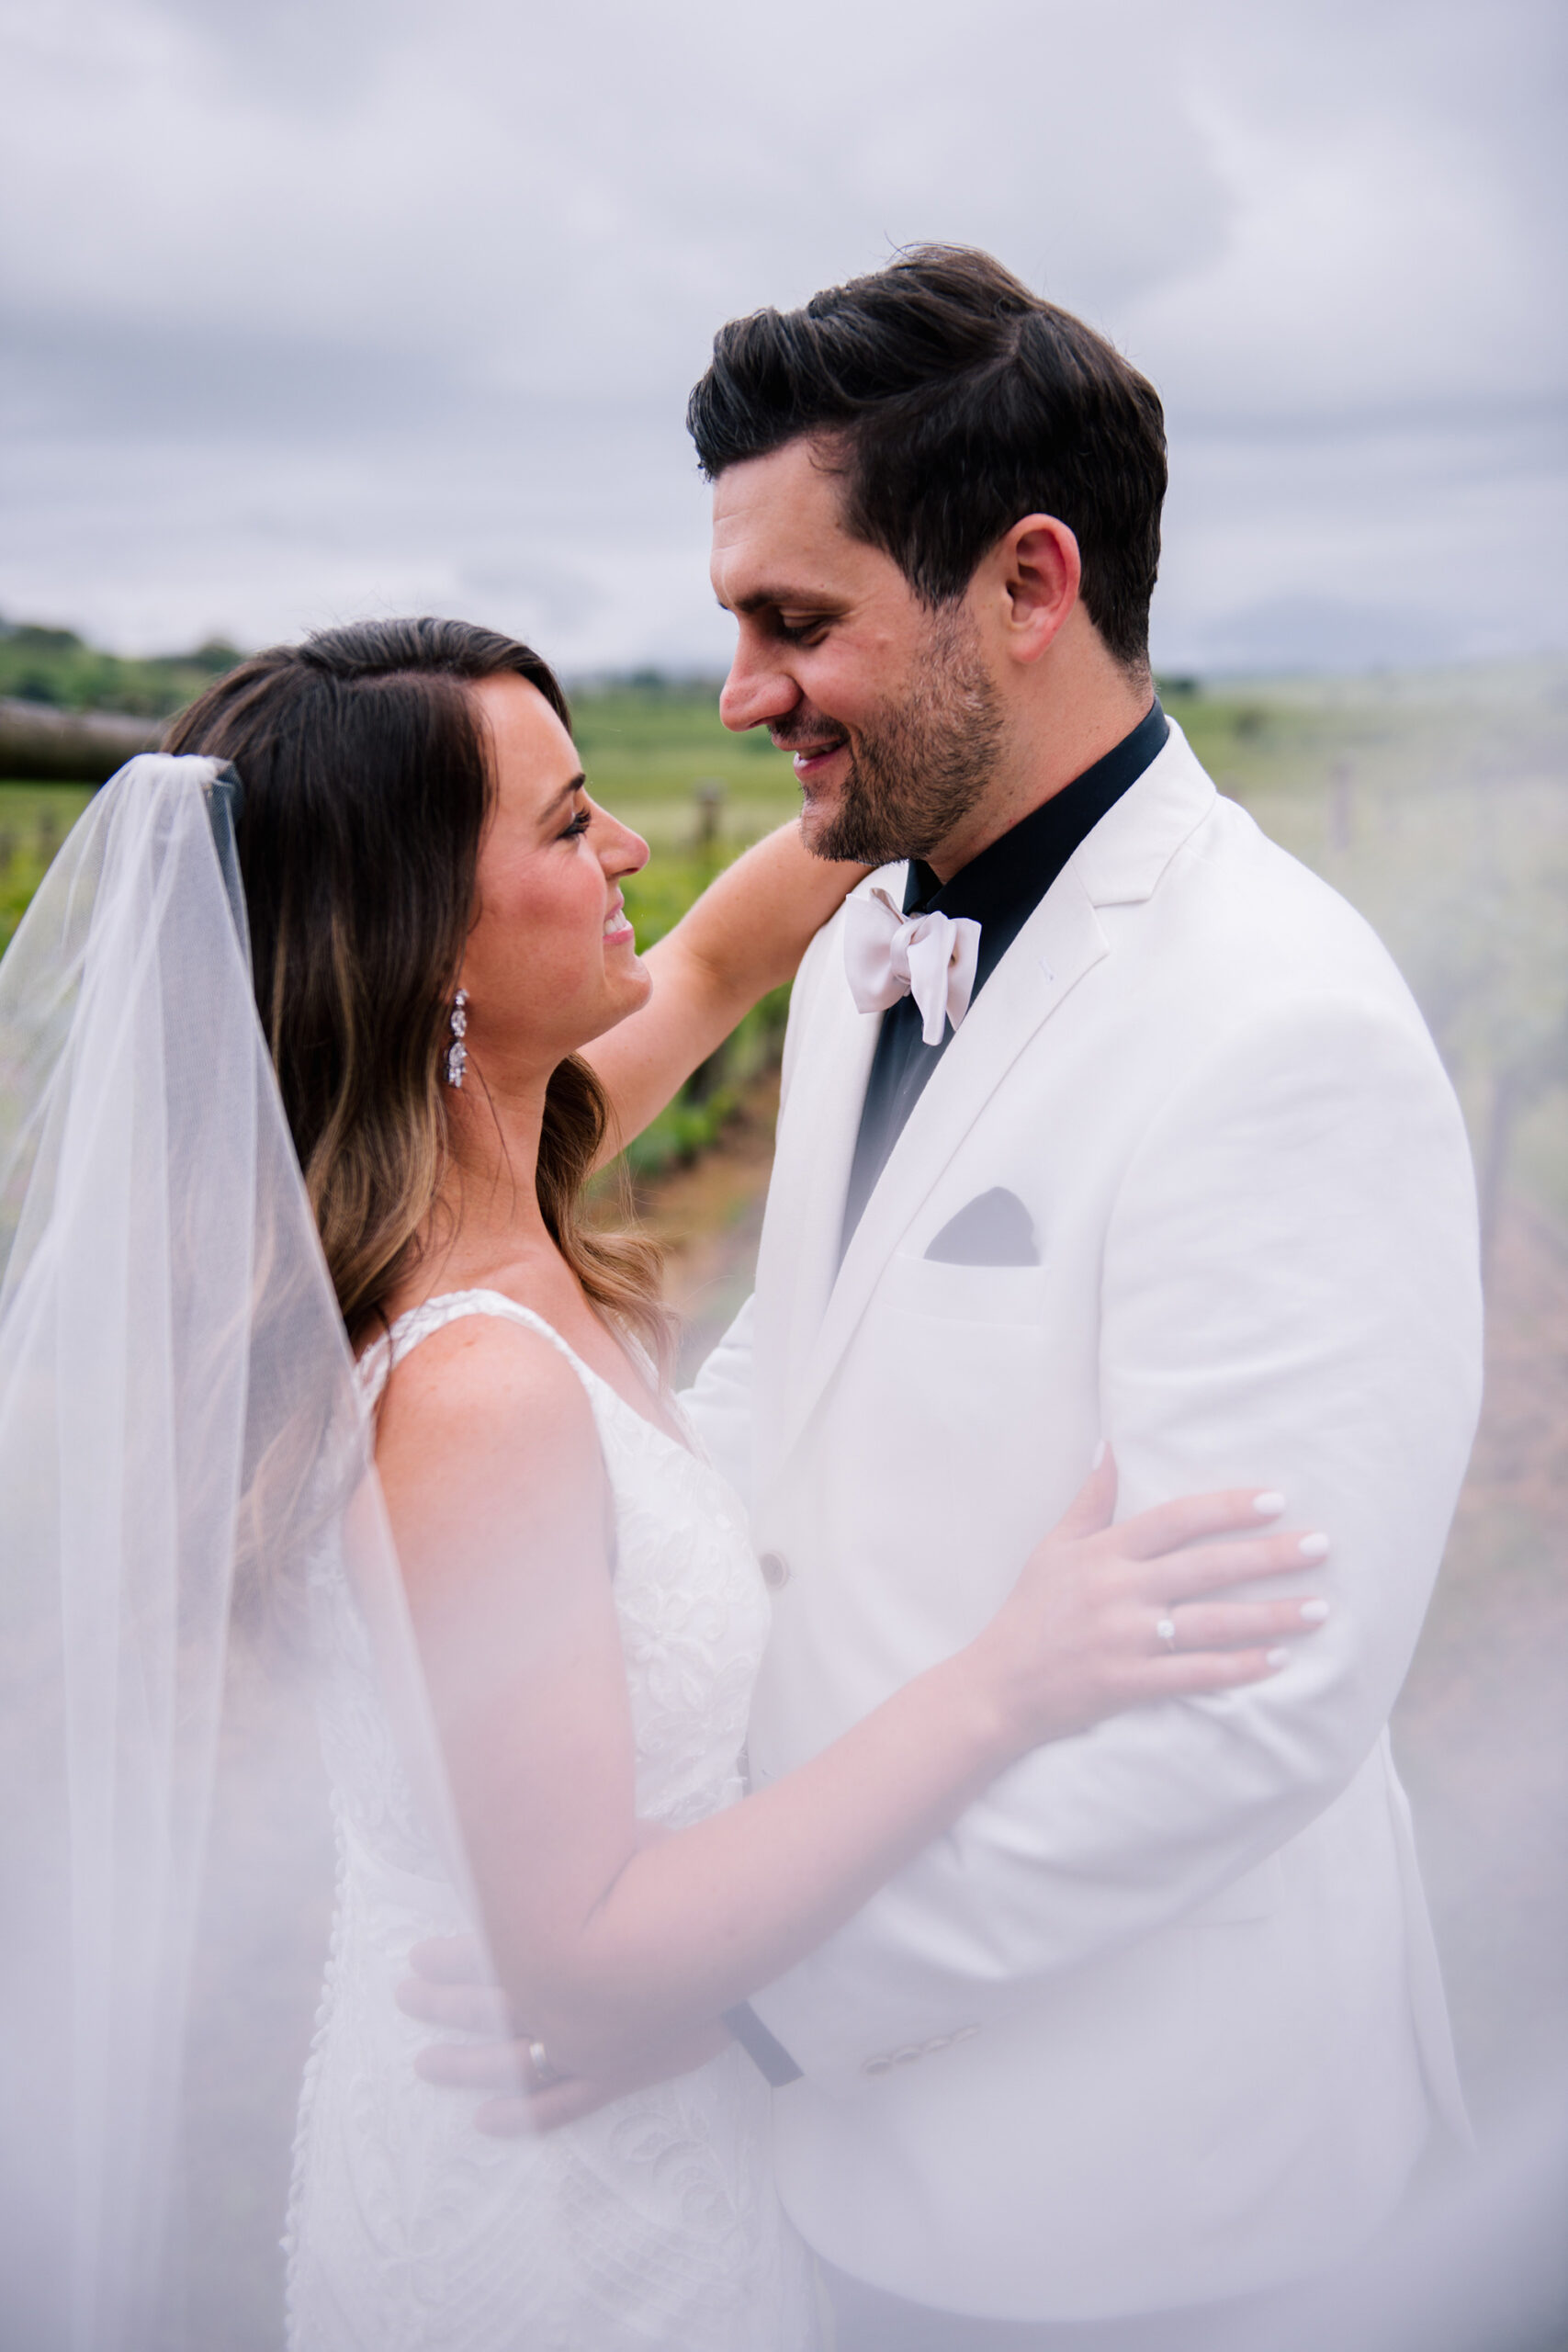 Claire Bernie Rustic Winery Wedding Love and Other Photography SBS 027 scaled